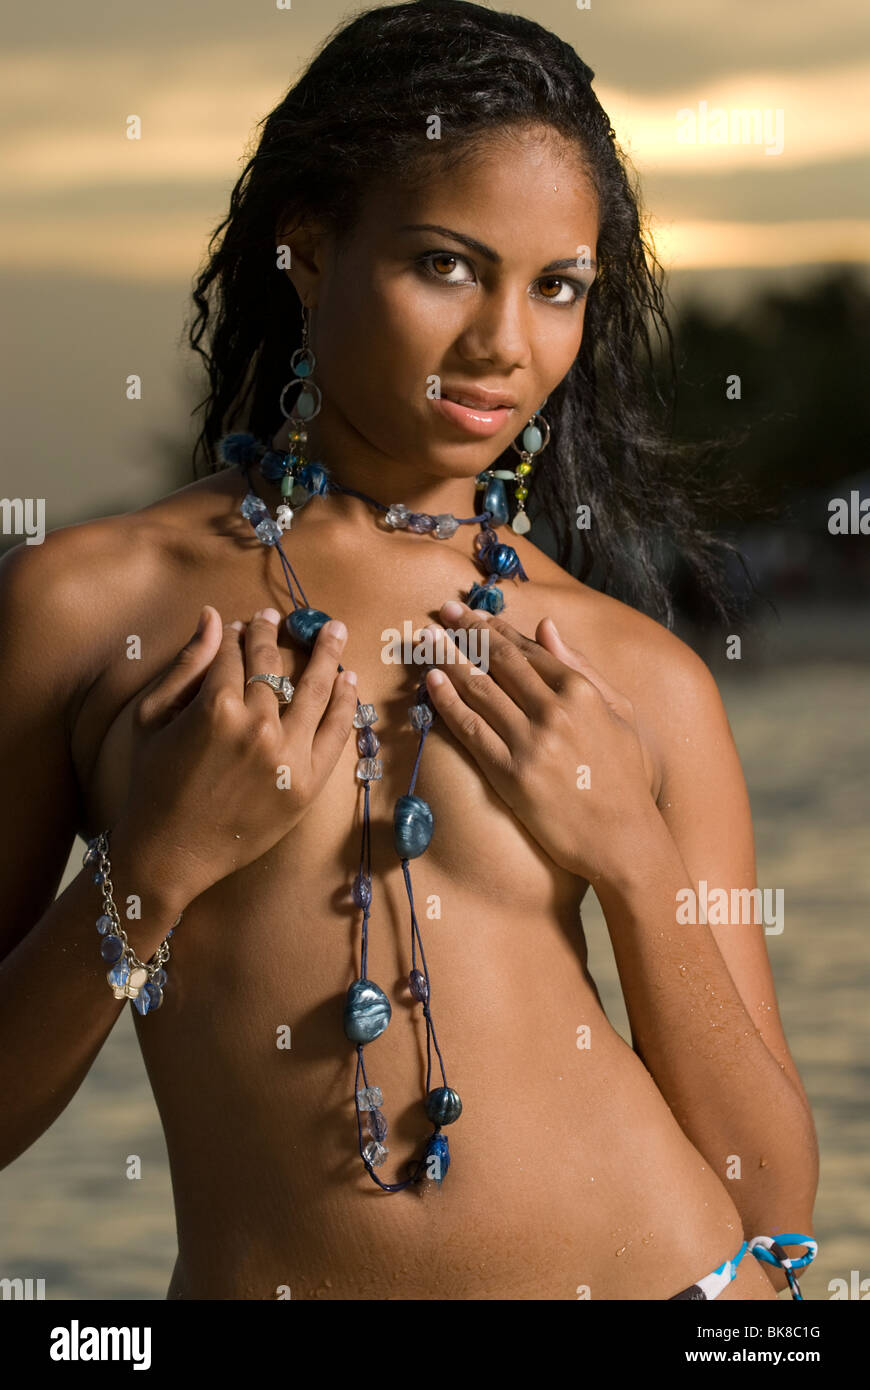 Beautiful young woman poses with beads and hands covering breasts Stock  Photo - Alamy